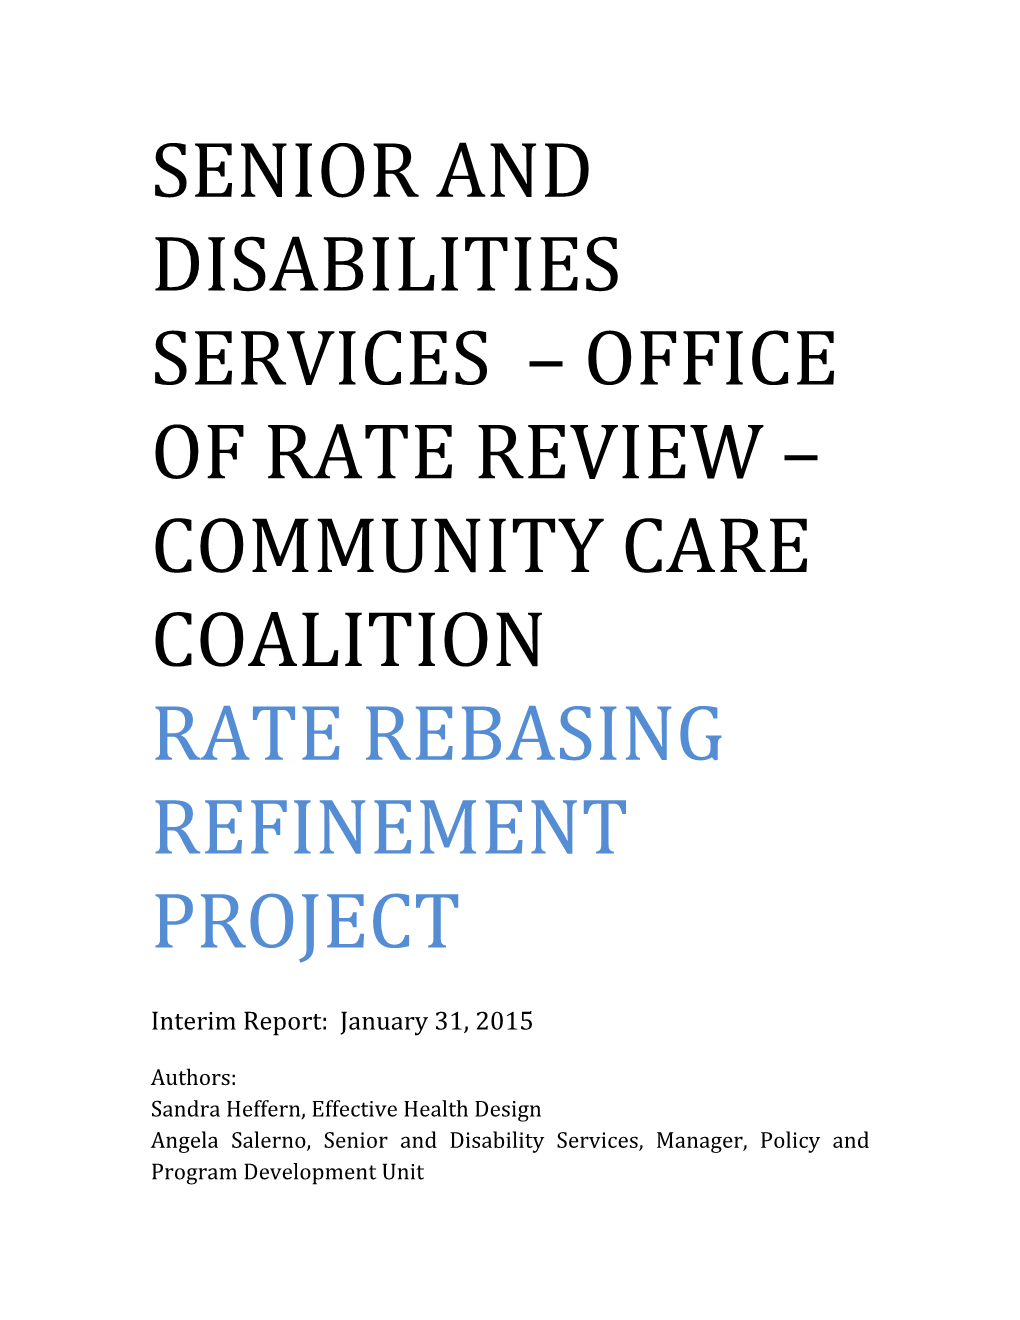 Senior and Disabilities Services Office of Rate Review Community Care Coalition